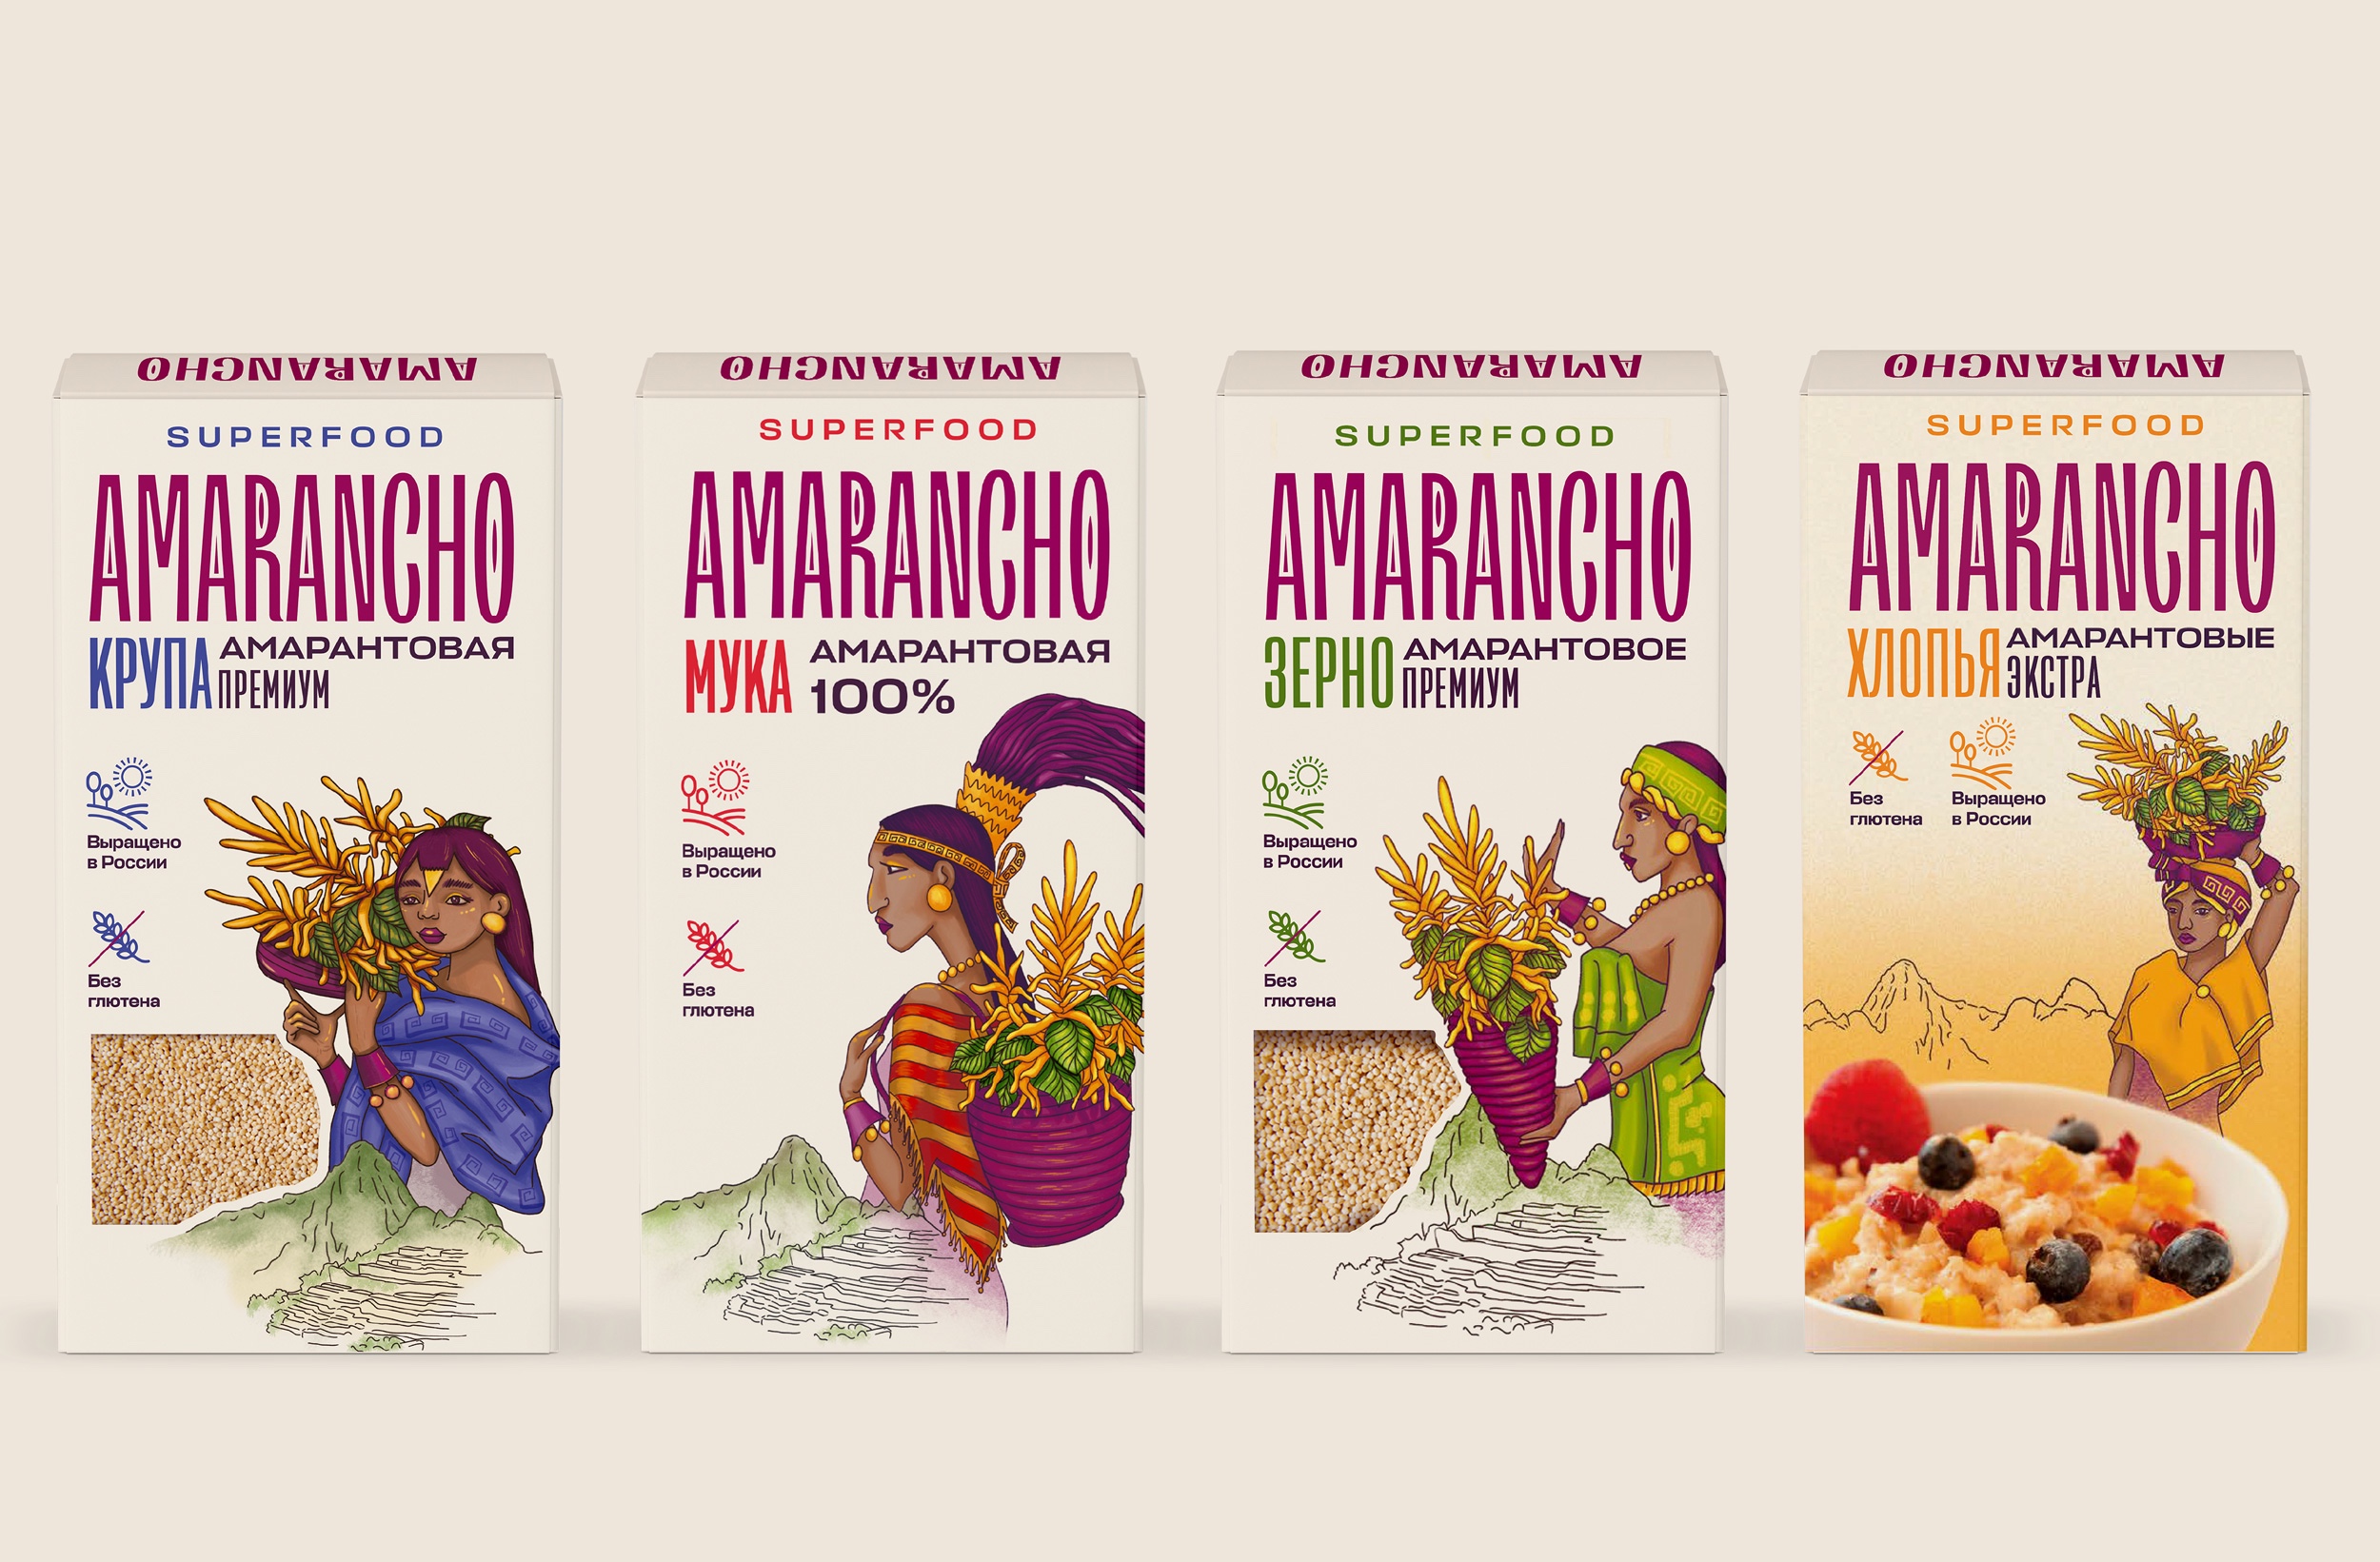 Discover the Story of Amarancho: Ohmybrand Agency’s Product Brand Design for Russian Olive’s Adapted Amaranth Crop